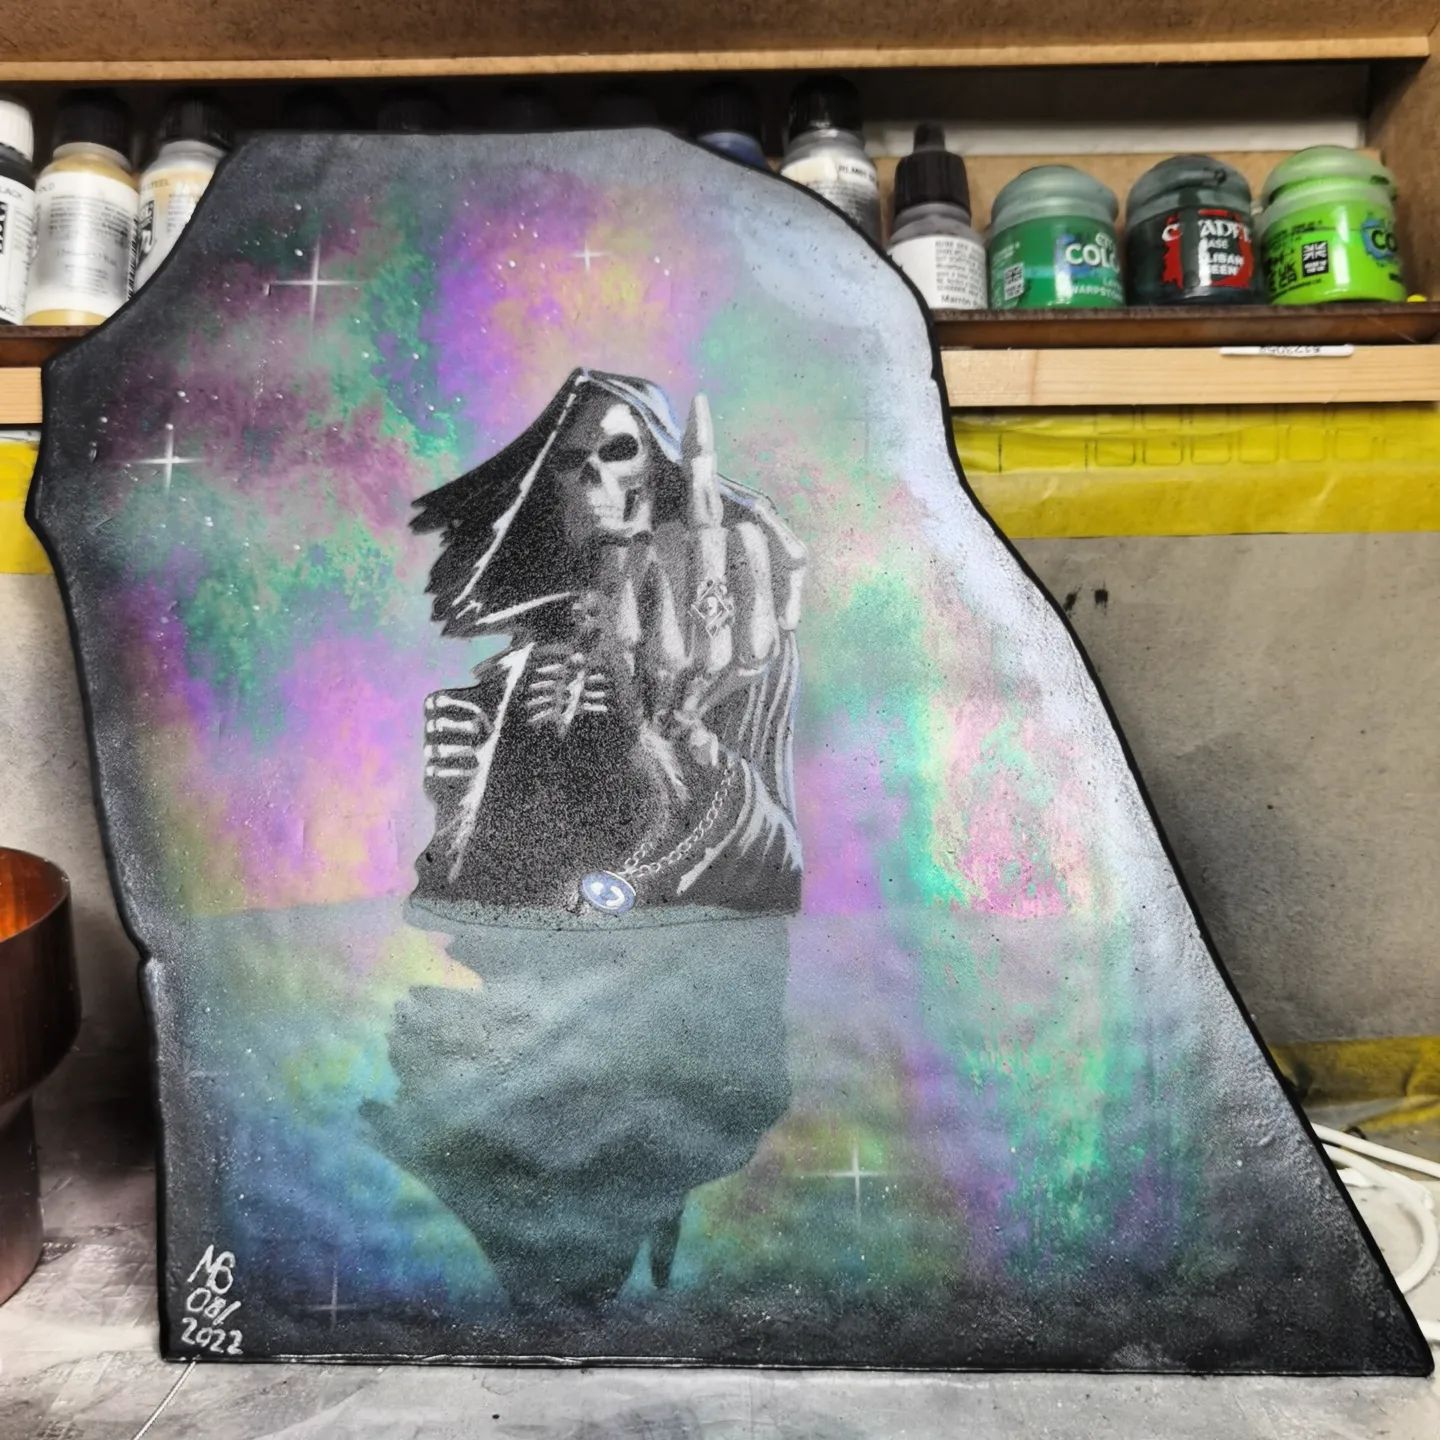 And another tryout
Airbrushart on rainbowglass. Stencil by UMR-Design. Just have to polish it.  #airbrush #art #airbrushart #artonglass #airbrushing #kunst #skull #umrdesign #glass #rainbowglass